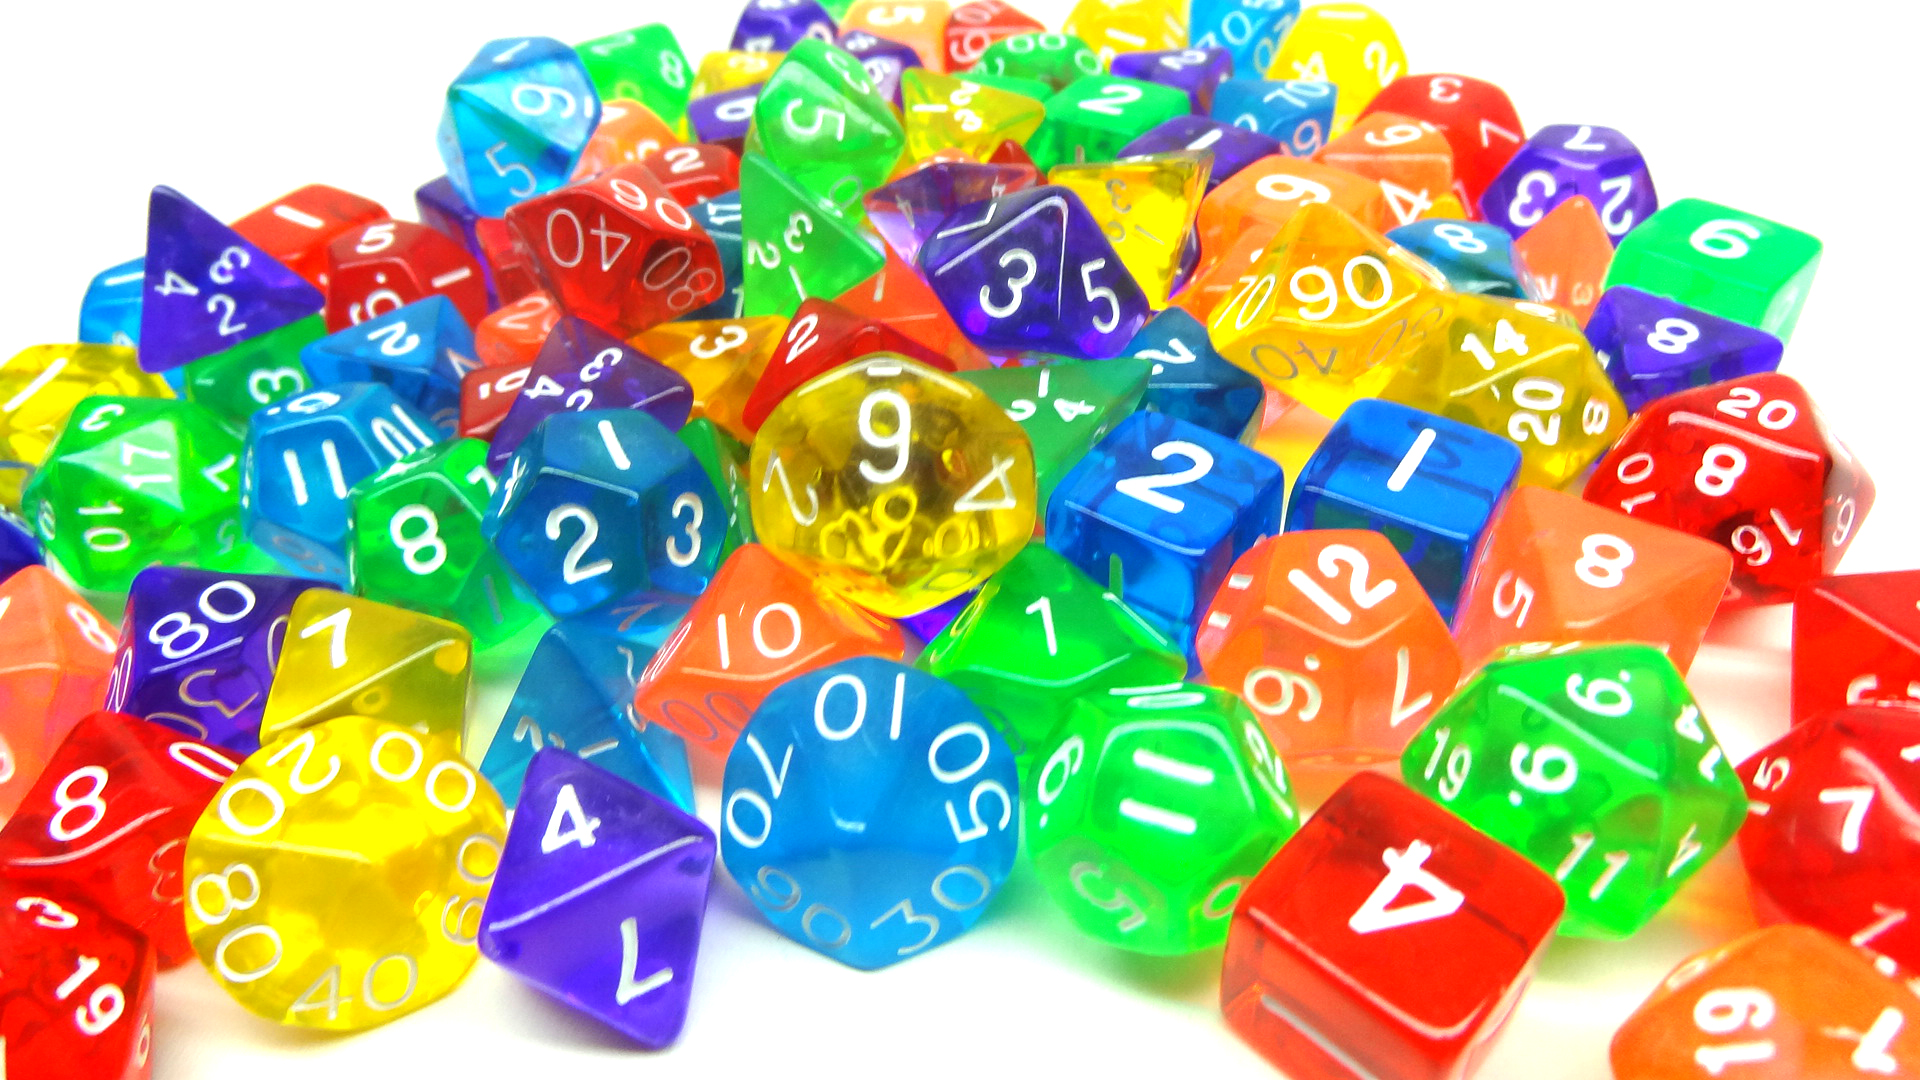 Polyhedral dice